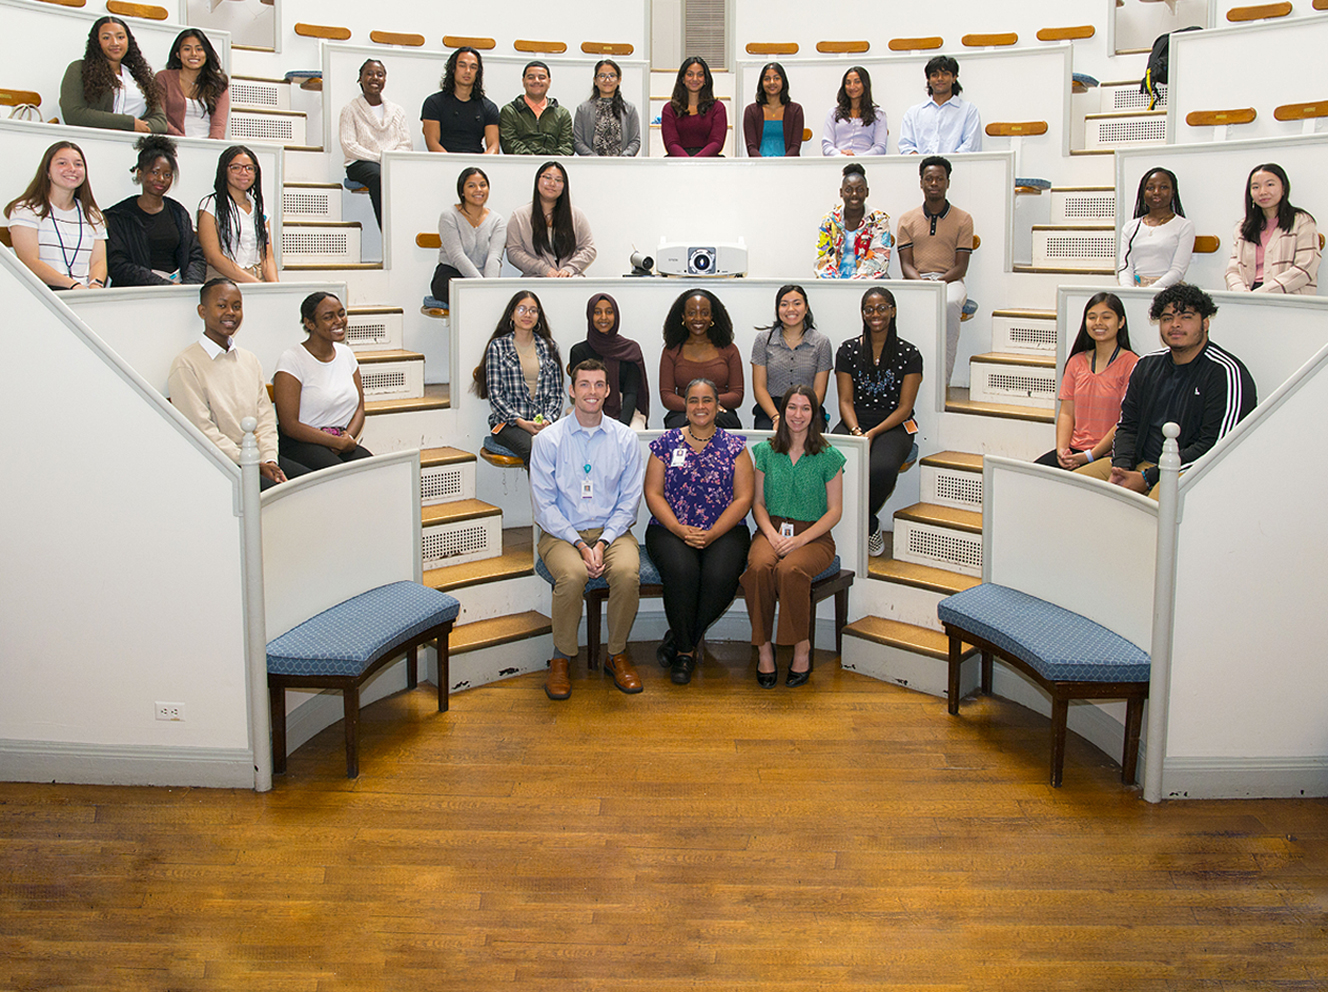 Pictured in Mass General's historic Ether Dome are 2023 high school and undergraduate interns of the Youth Neurology Education and Research Program, along with program staff and director Nicte Mejia, MD, MPH, FAAN (front center).